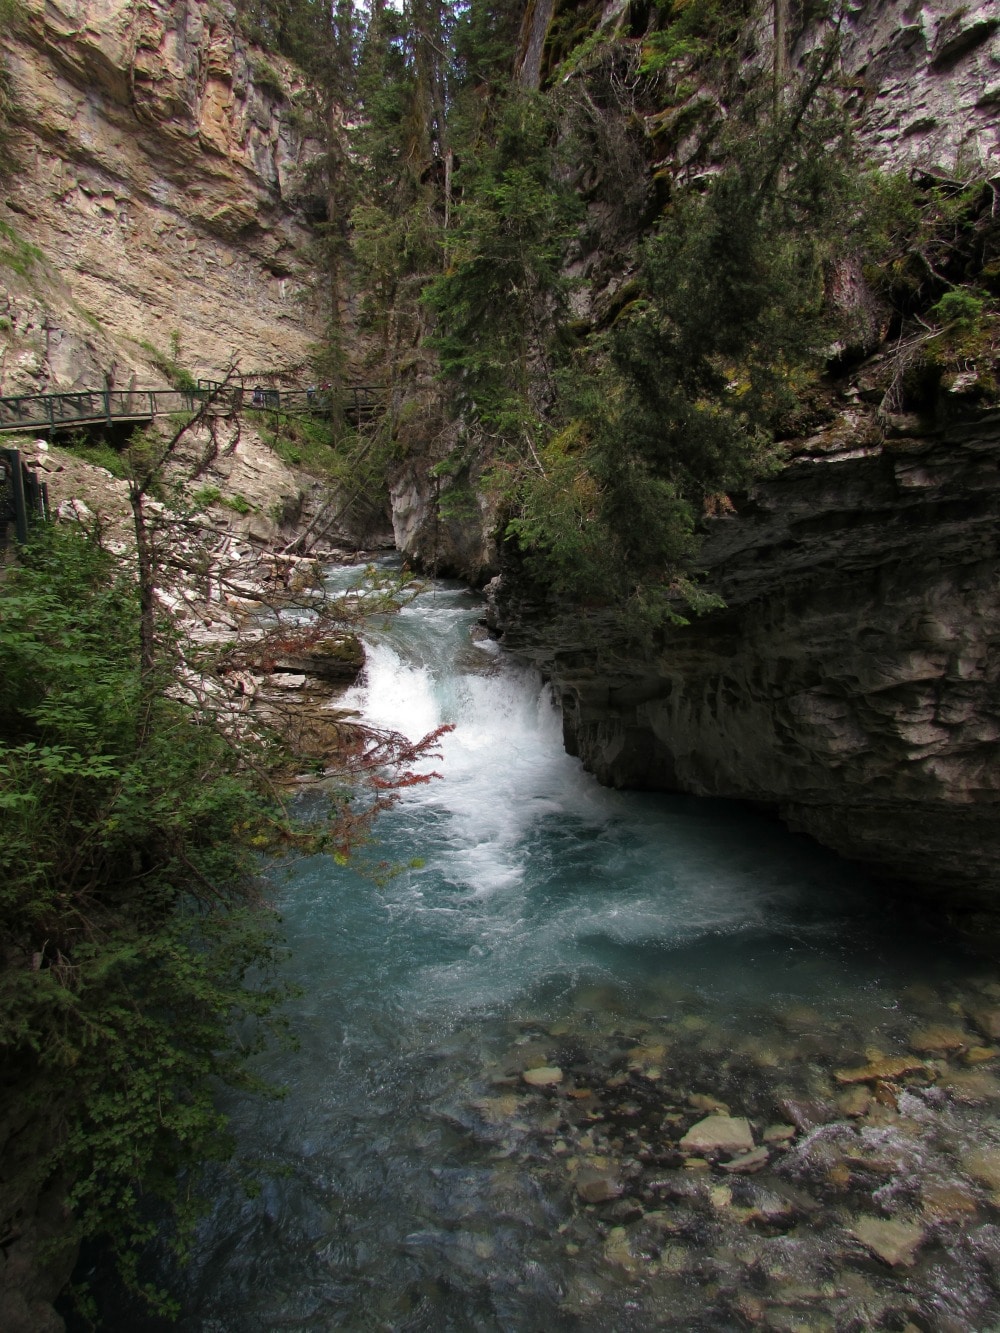 Johnston Canyon #waterfall with catwalks built into the limestone walls #Canada #Banff